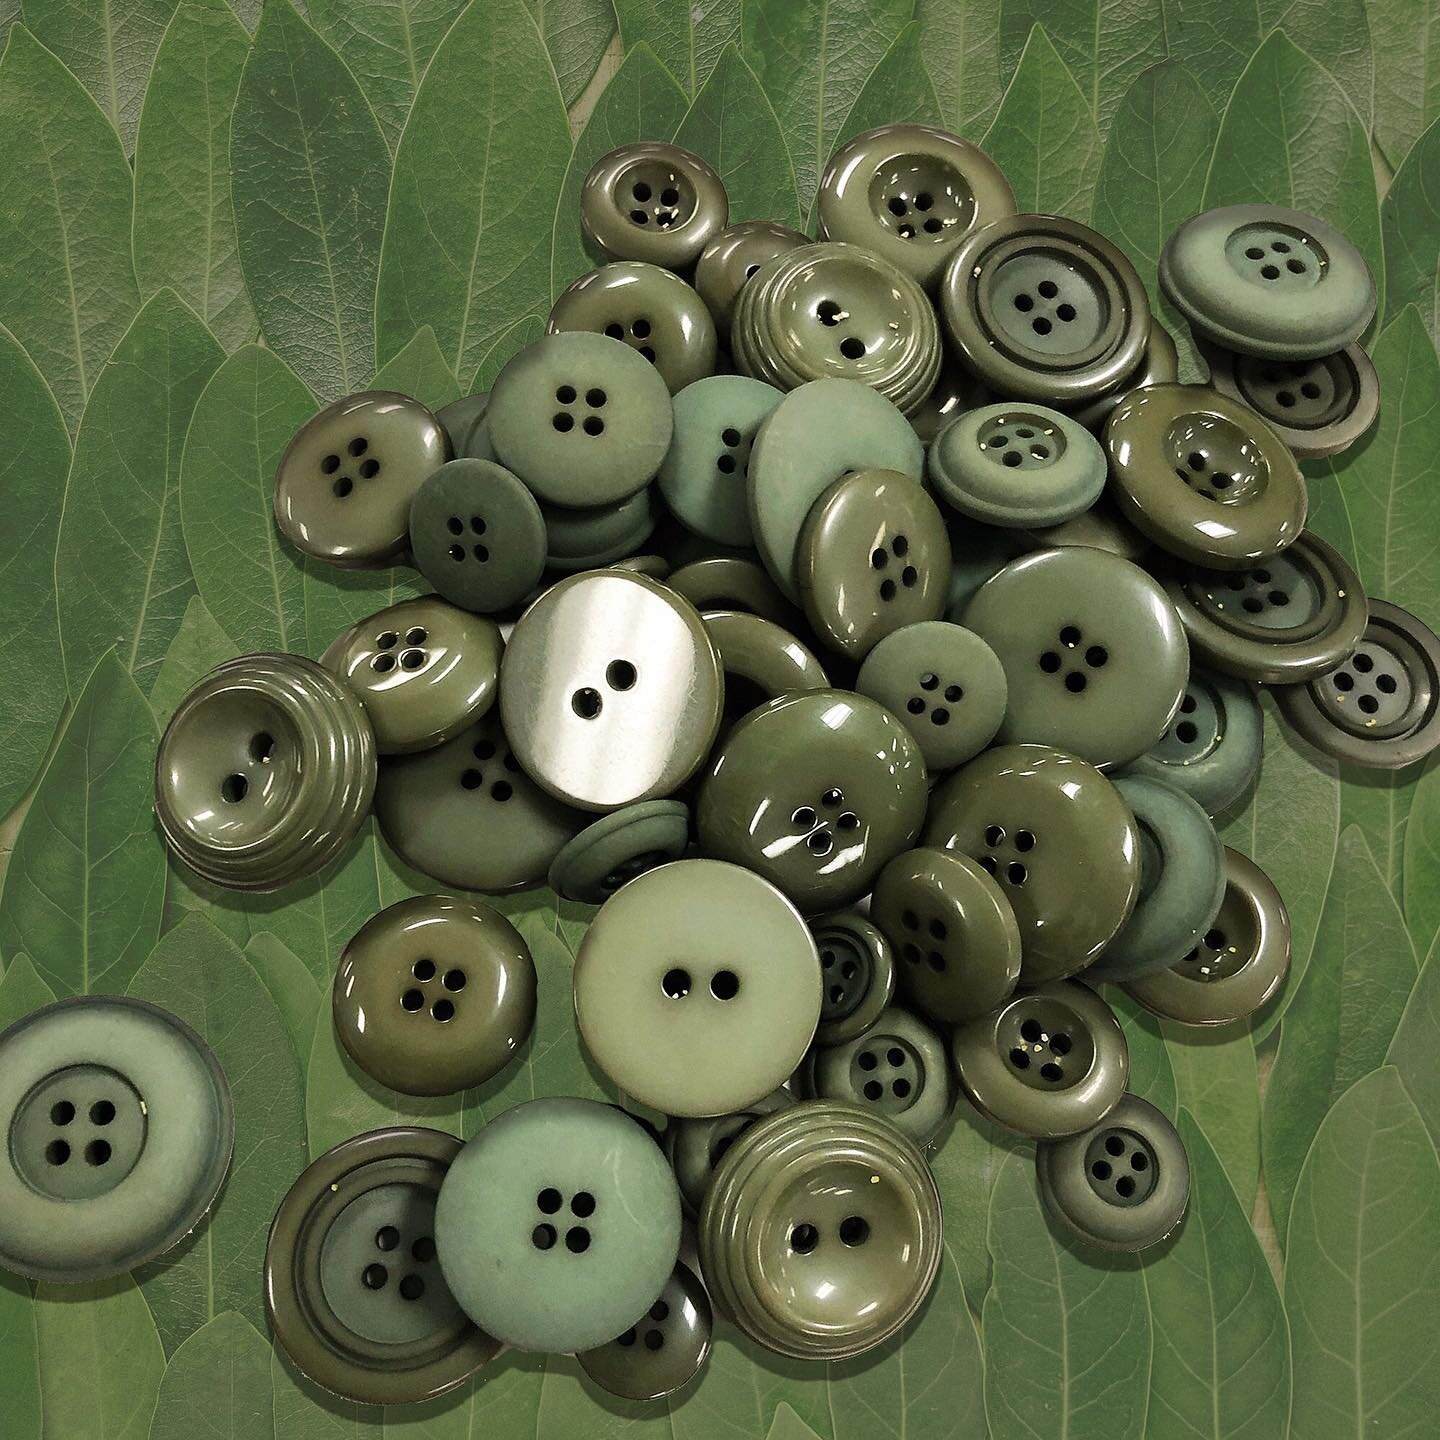 We are ready for fall with all these olive buttons 💚💚 love all the shades of green in both matte and shiny finishes 🍃☘️🌵
.
.
.
.
#button #buttons #fashion #trims #newproduct #fall #prefall #fashionweek #fashionphotography #fashionkilla #fashionis